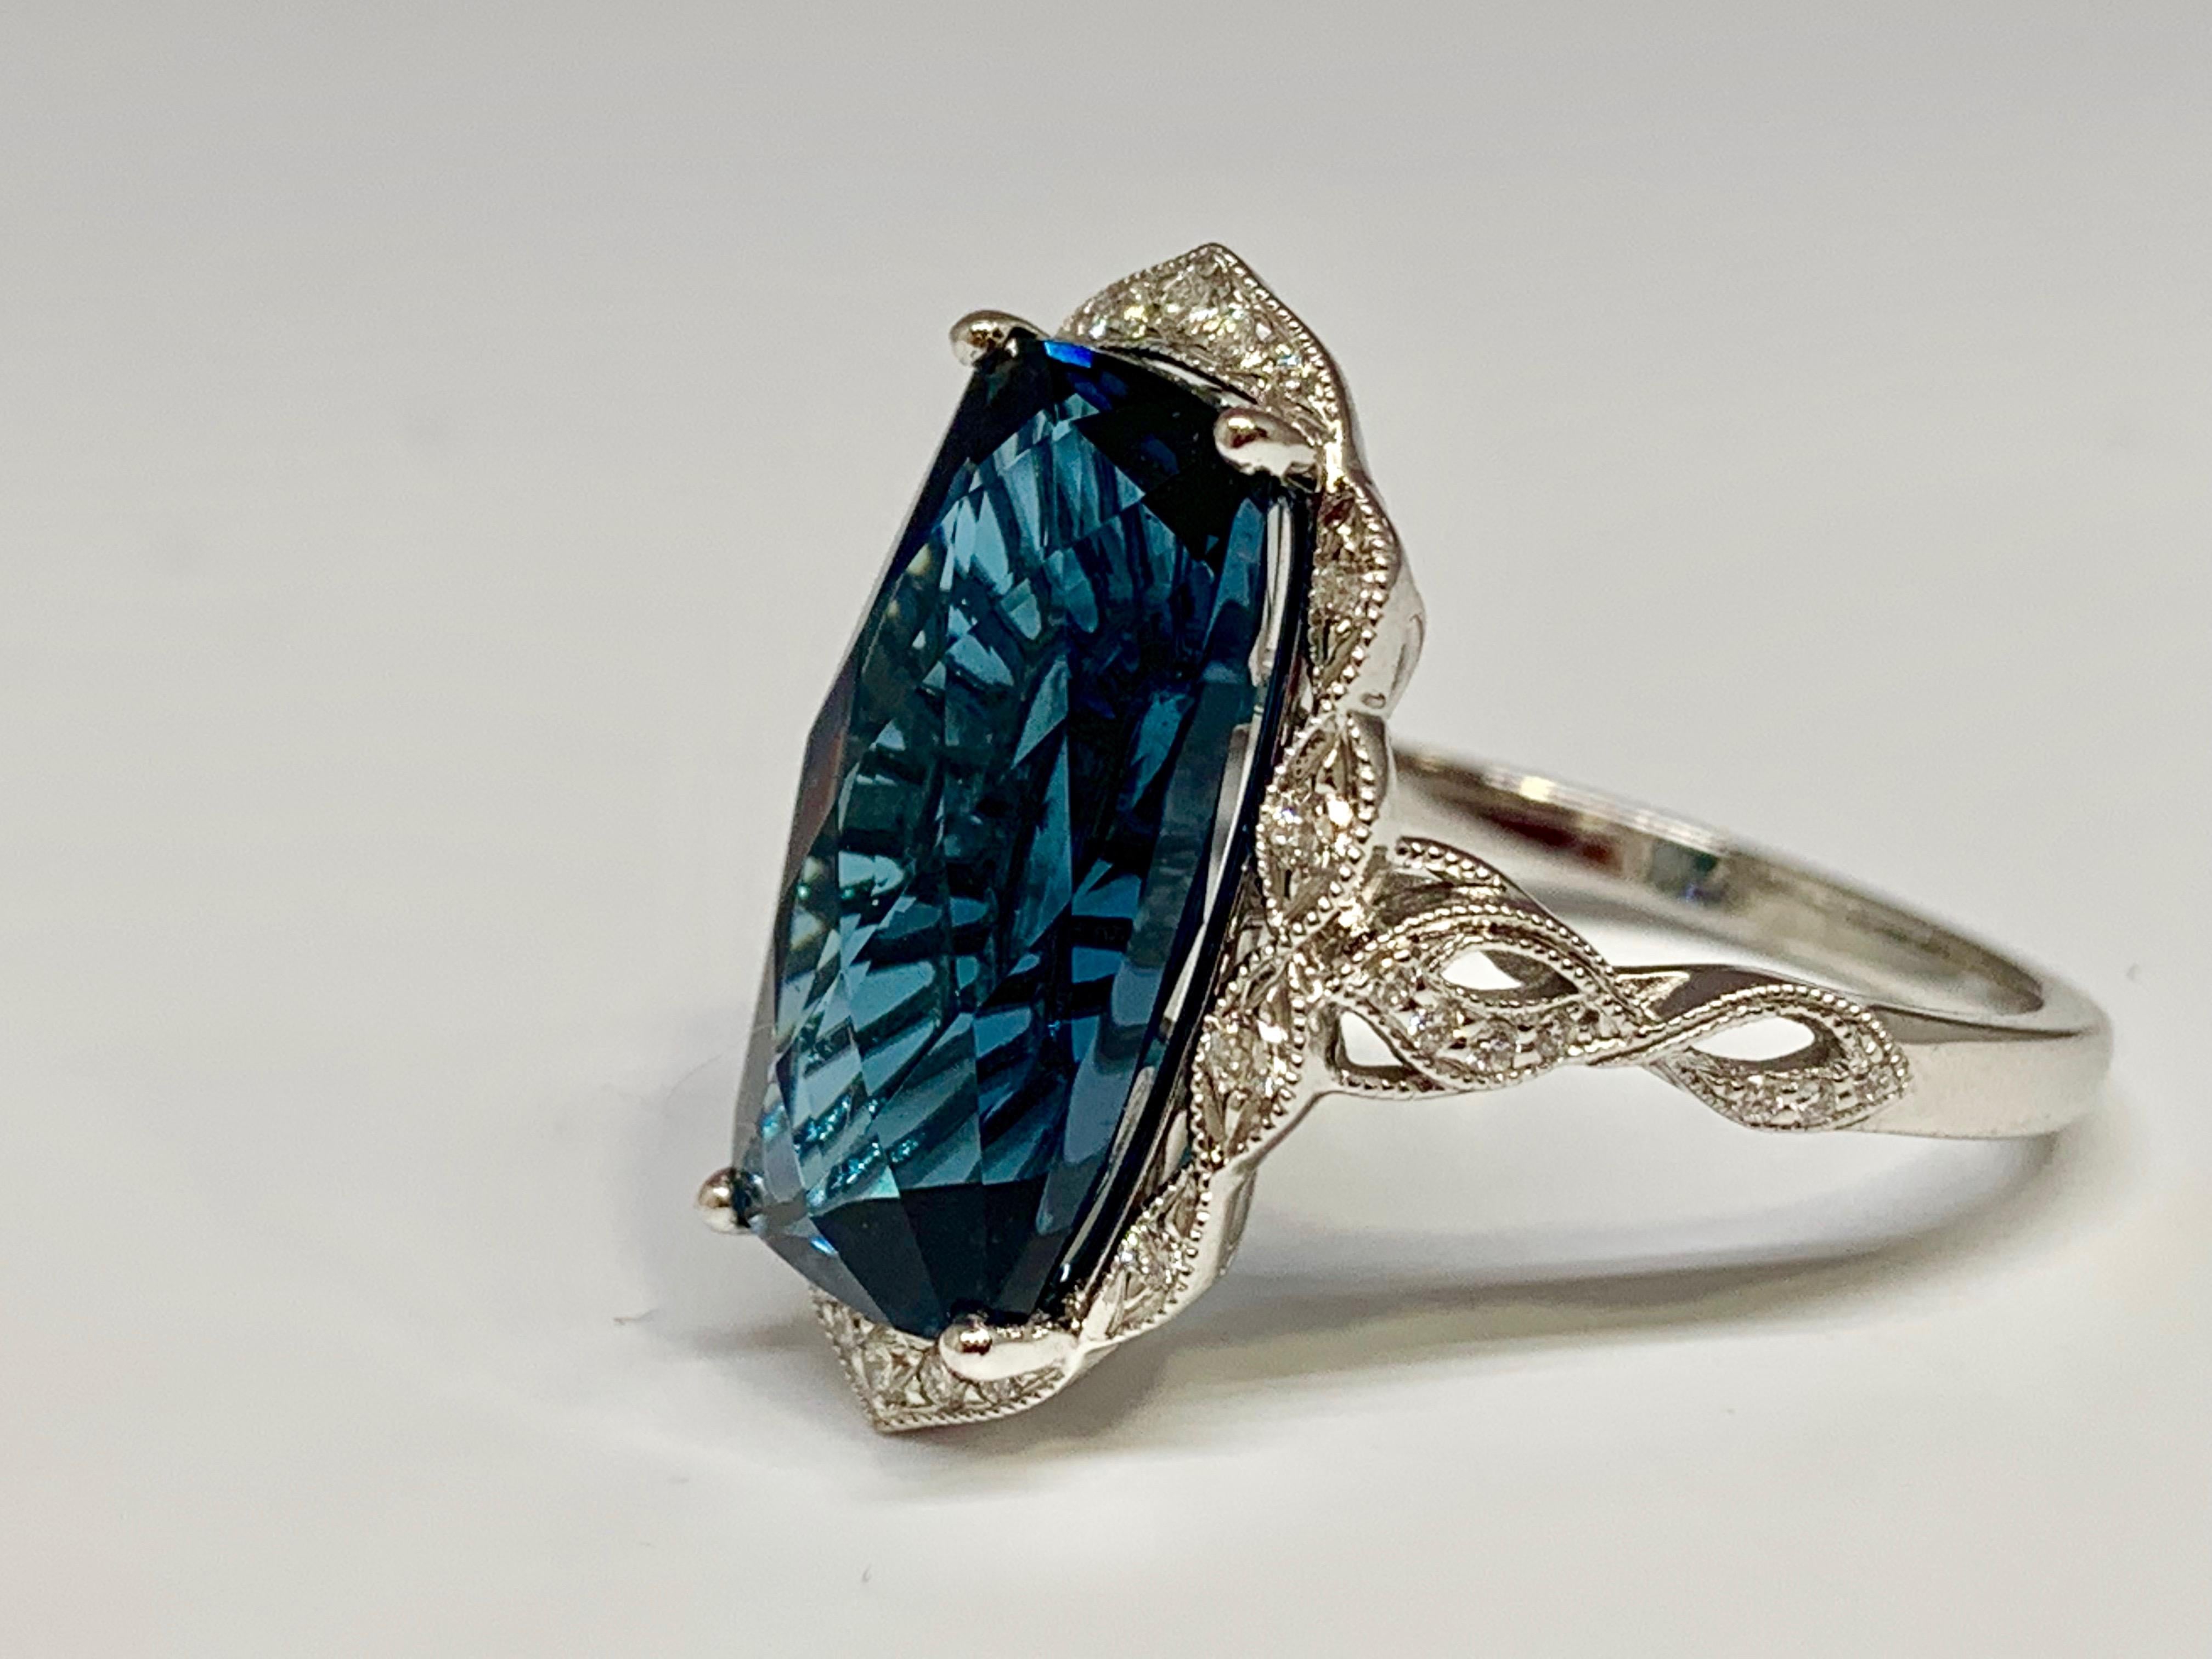 This gorgeous cocktail ring from Allison-Kaufman Company holds a 6.75 carat elongated cushion cut blue topaz with checkerboard faceting. The 14K white gold mounting includes 0.15 carats of round diamonds within its vintage inspired halo. The ring is